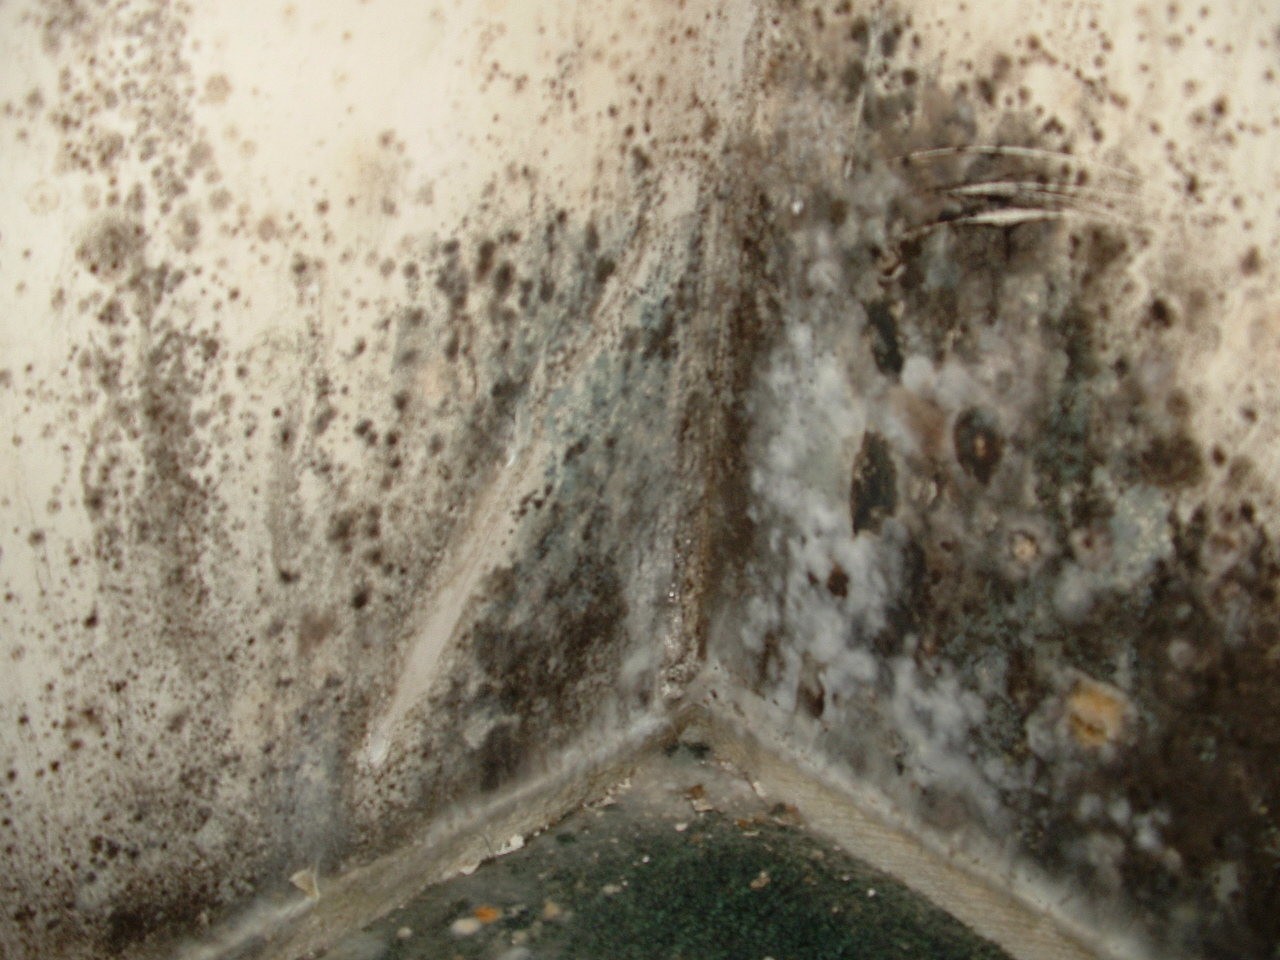 Free Download Lpt How To Get Rid Of Mold On Your Bathroom Ceiling